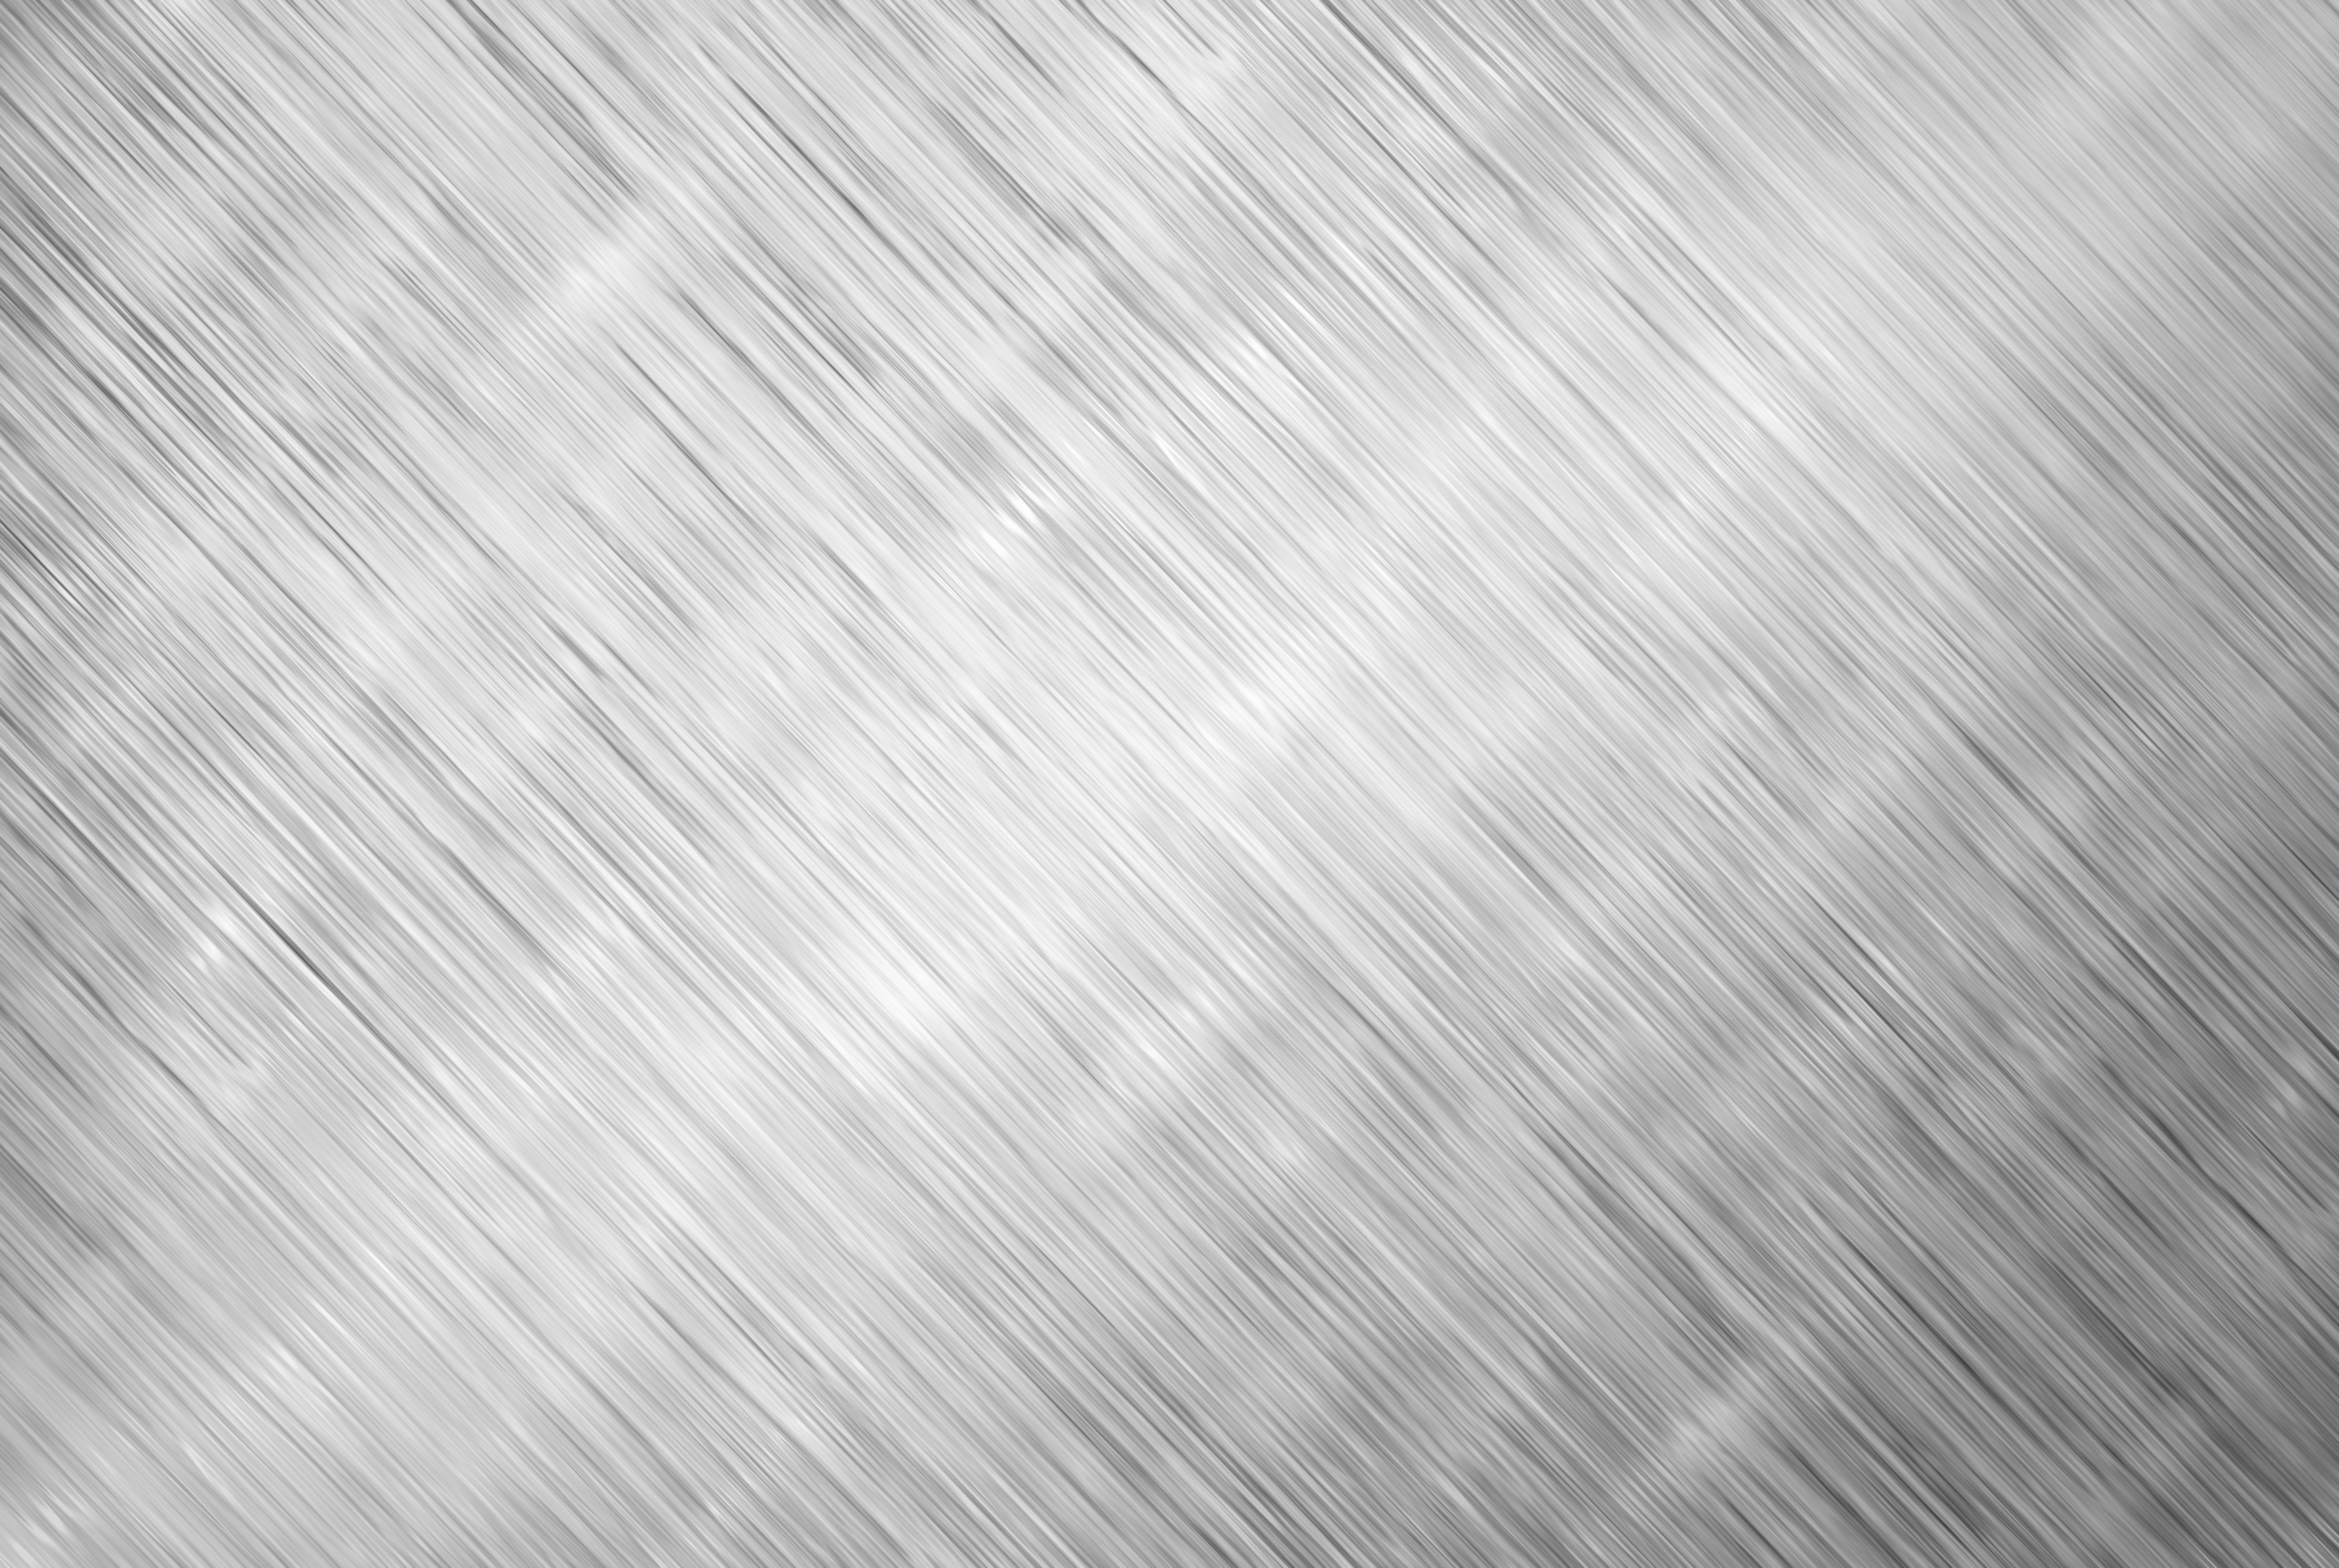 Another Brushed Steel Metal Background Texture Textures